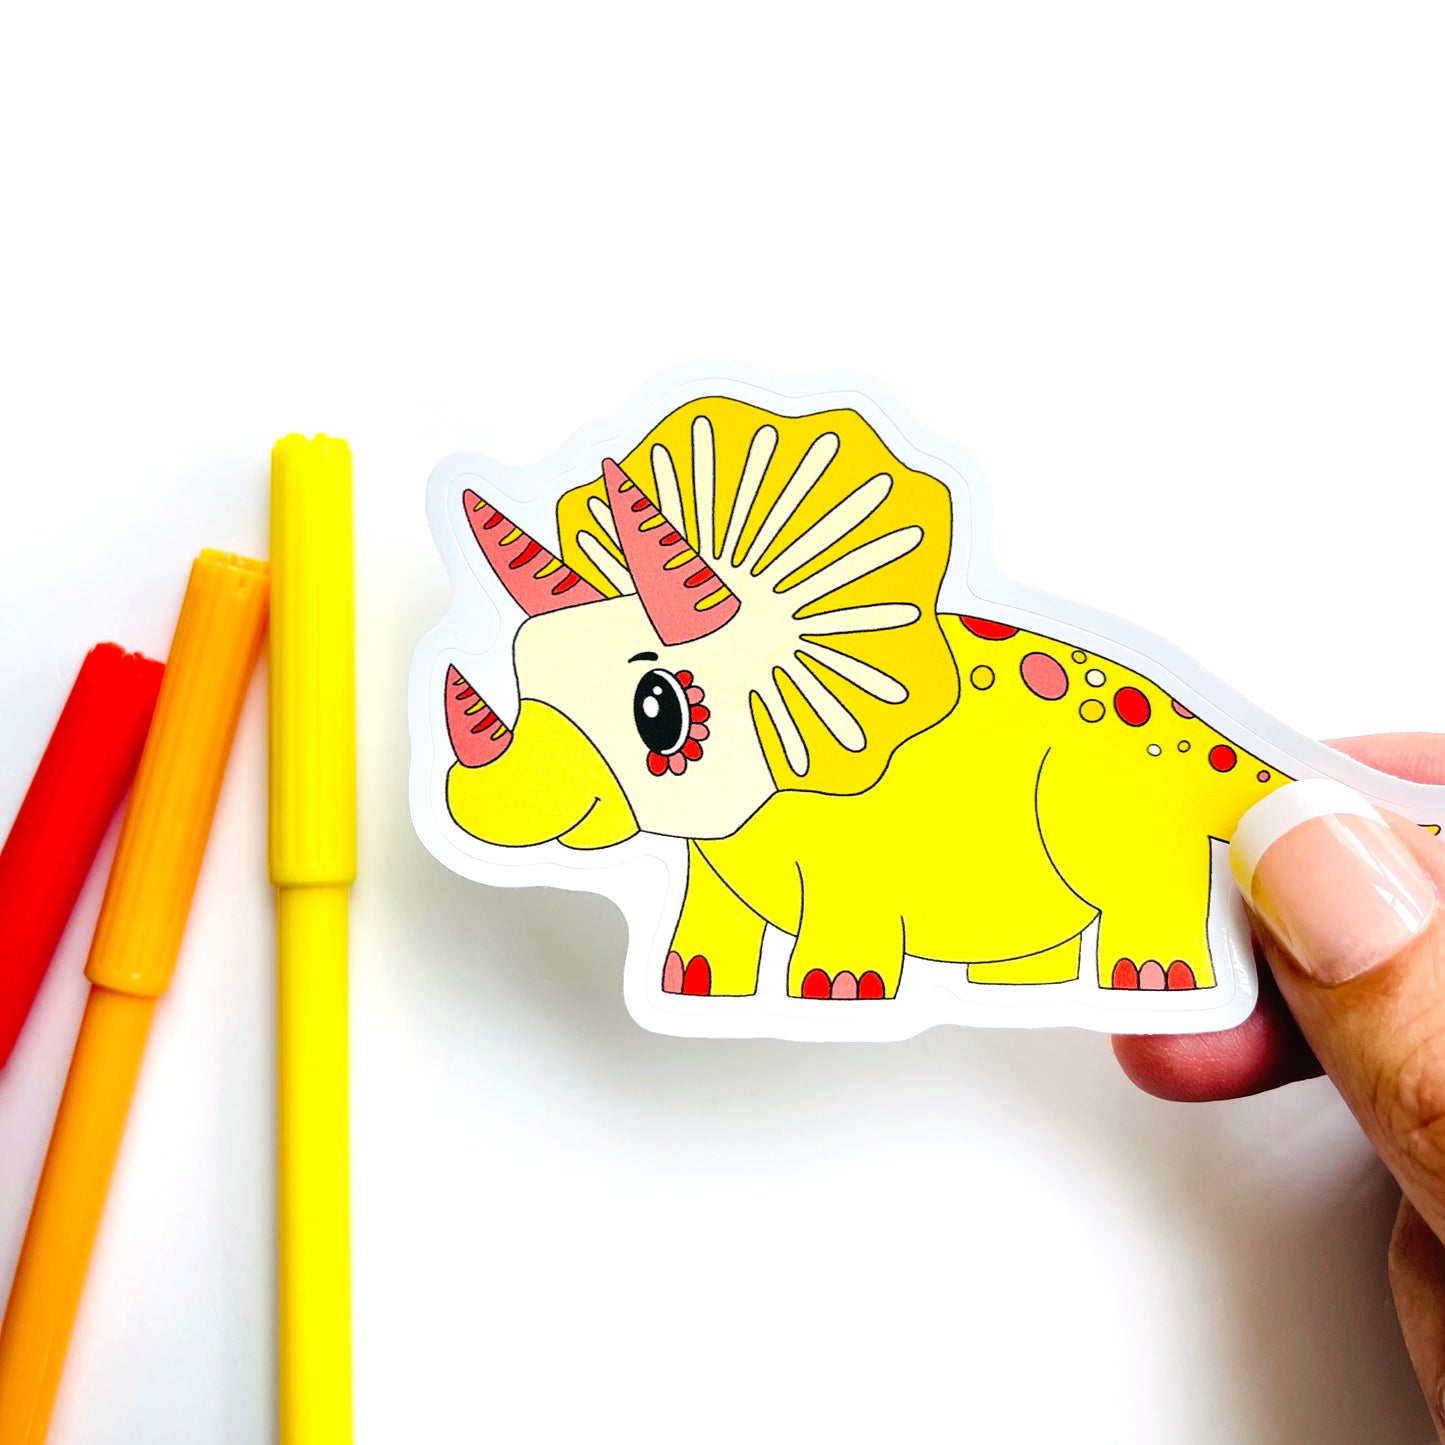 Complete Baby Dino Sticker Pack - 6 stickers — ashereast